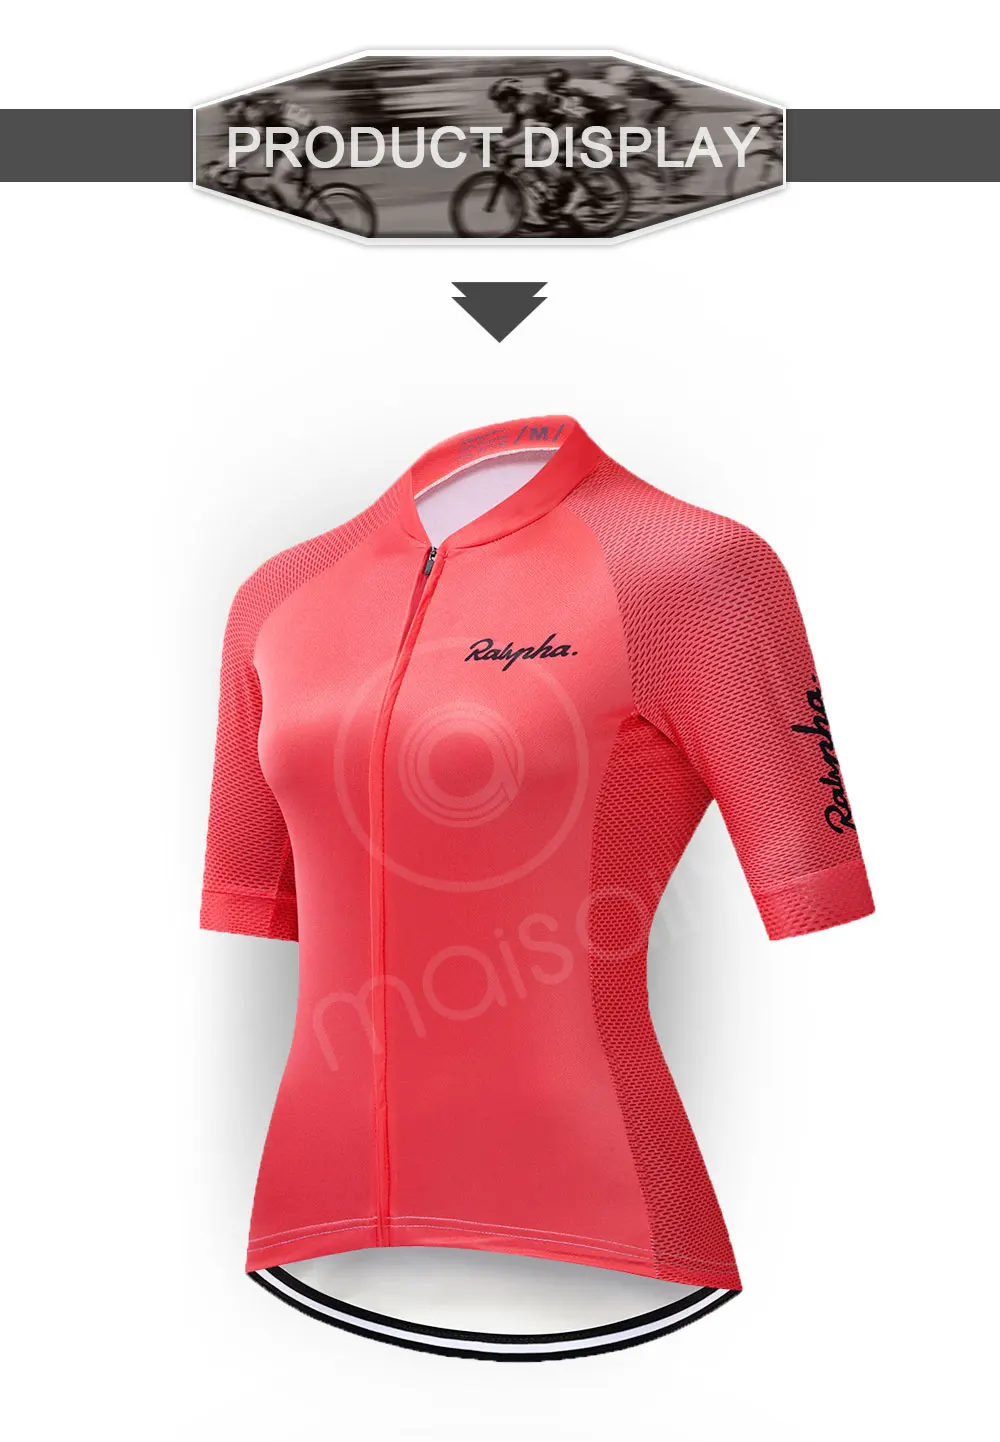 Ralvpha 2021 Woman Cycling Jersey Set Pro Bicycle Sportswear Bike Clothes Shorts Sleeve Cycling Clothing Maillot Ropa Ciclismo